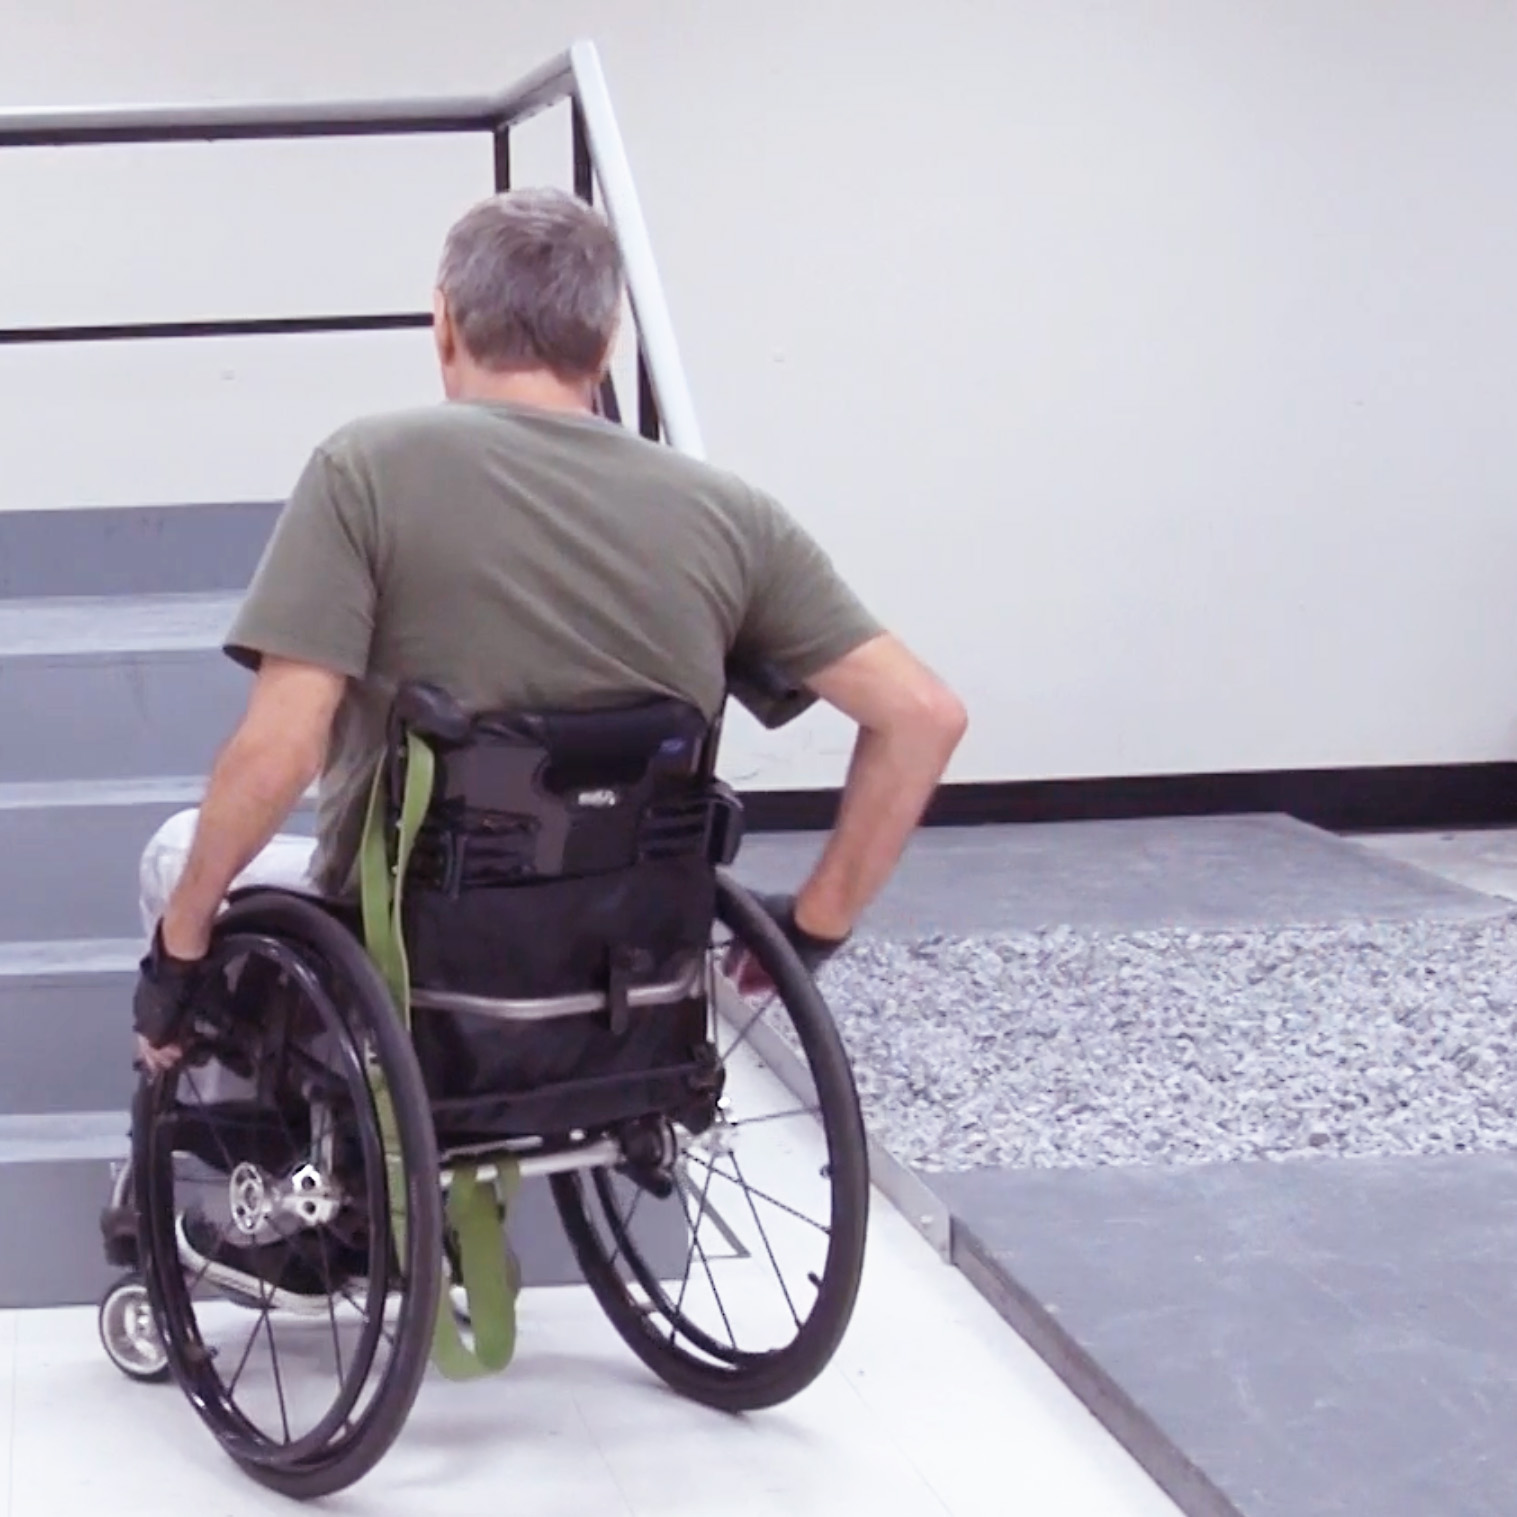 Wheelchair mobility assessment Lab (C-19)